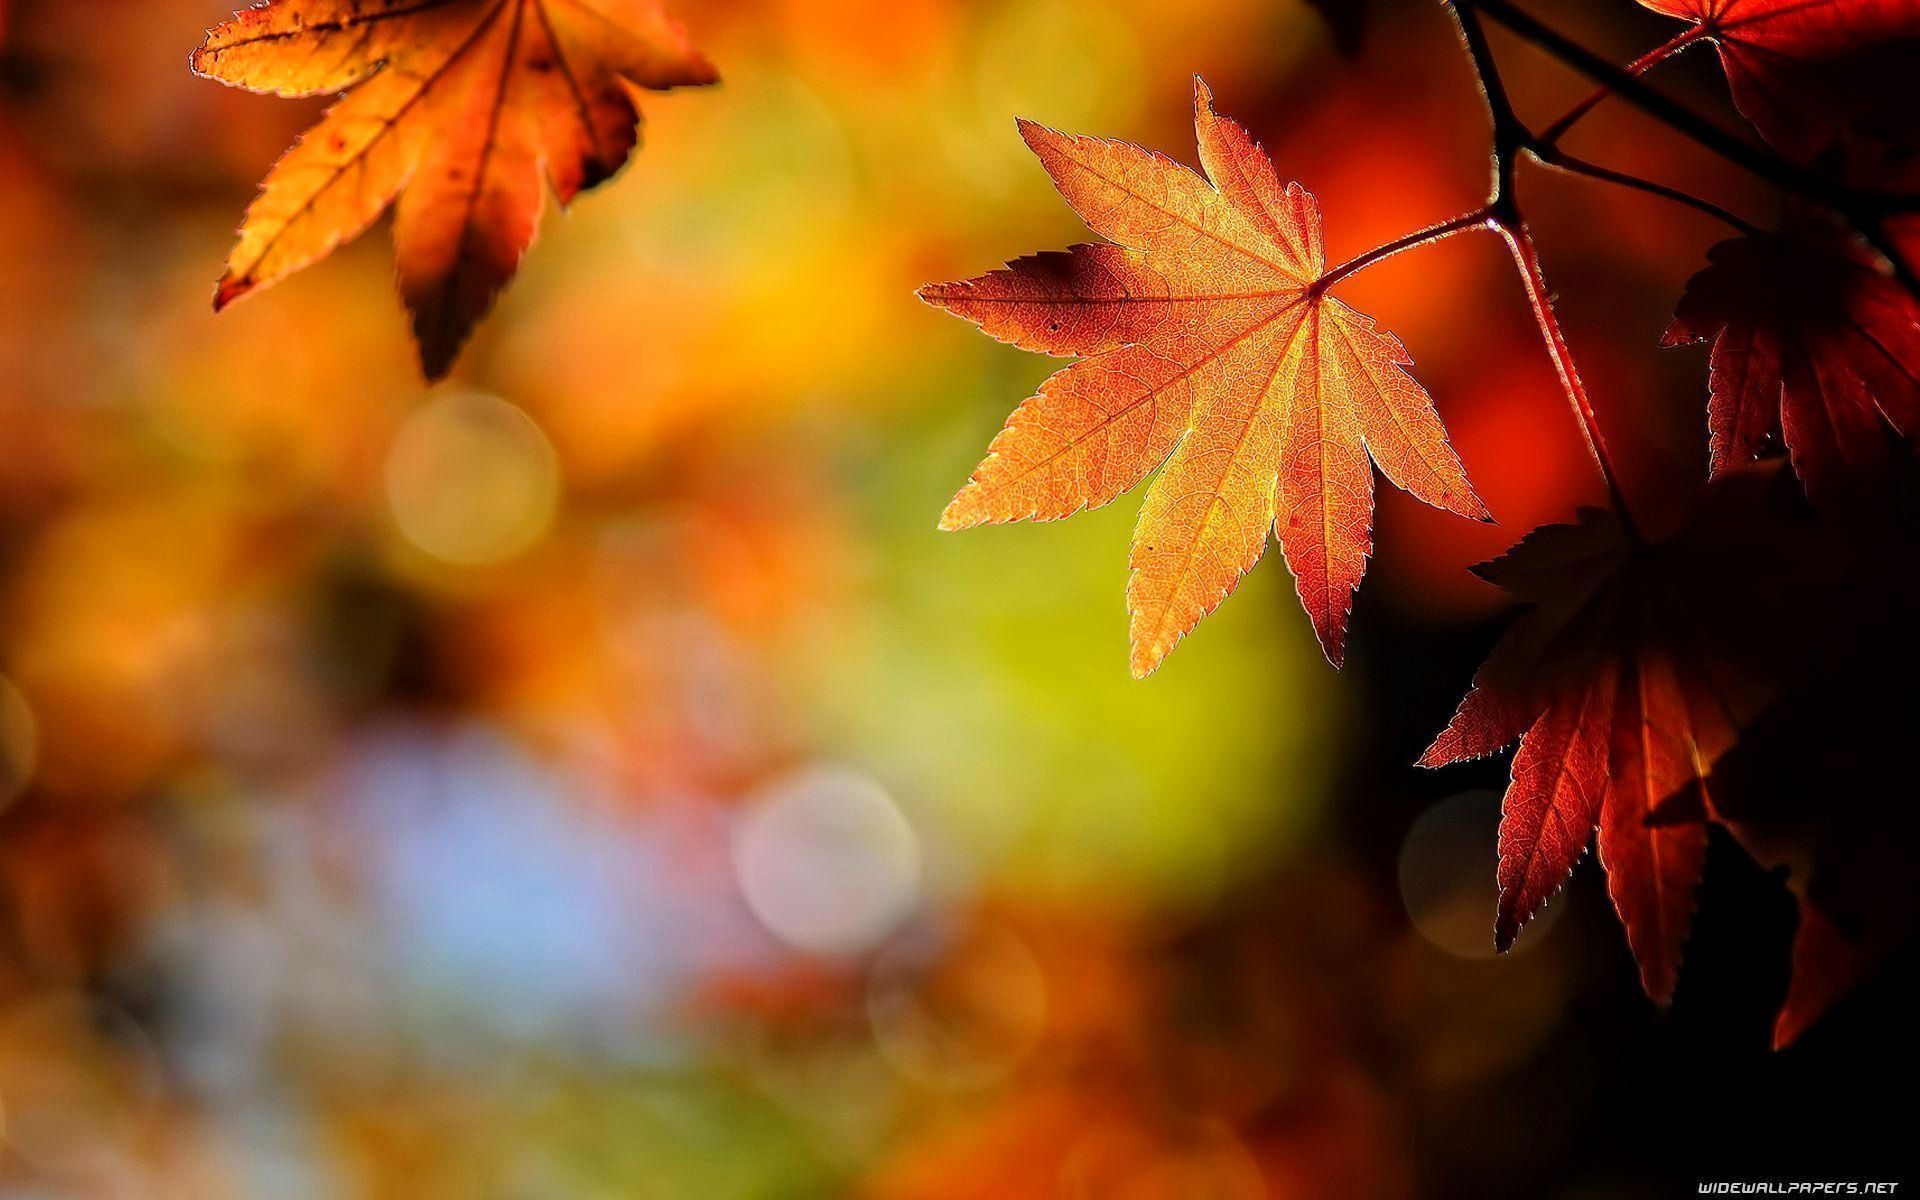 Autumn Leaf Wallpaper Fresh Full HD Autumn or Fall Wallpaper with Maple Leaves This Week of The Hudson